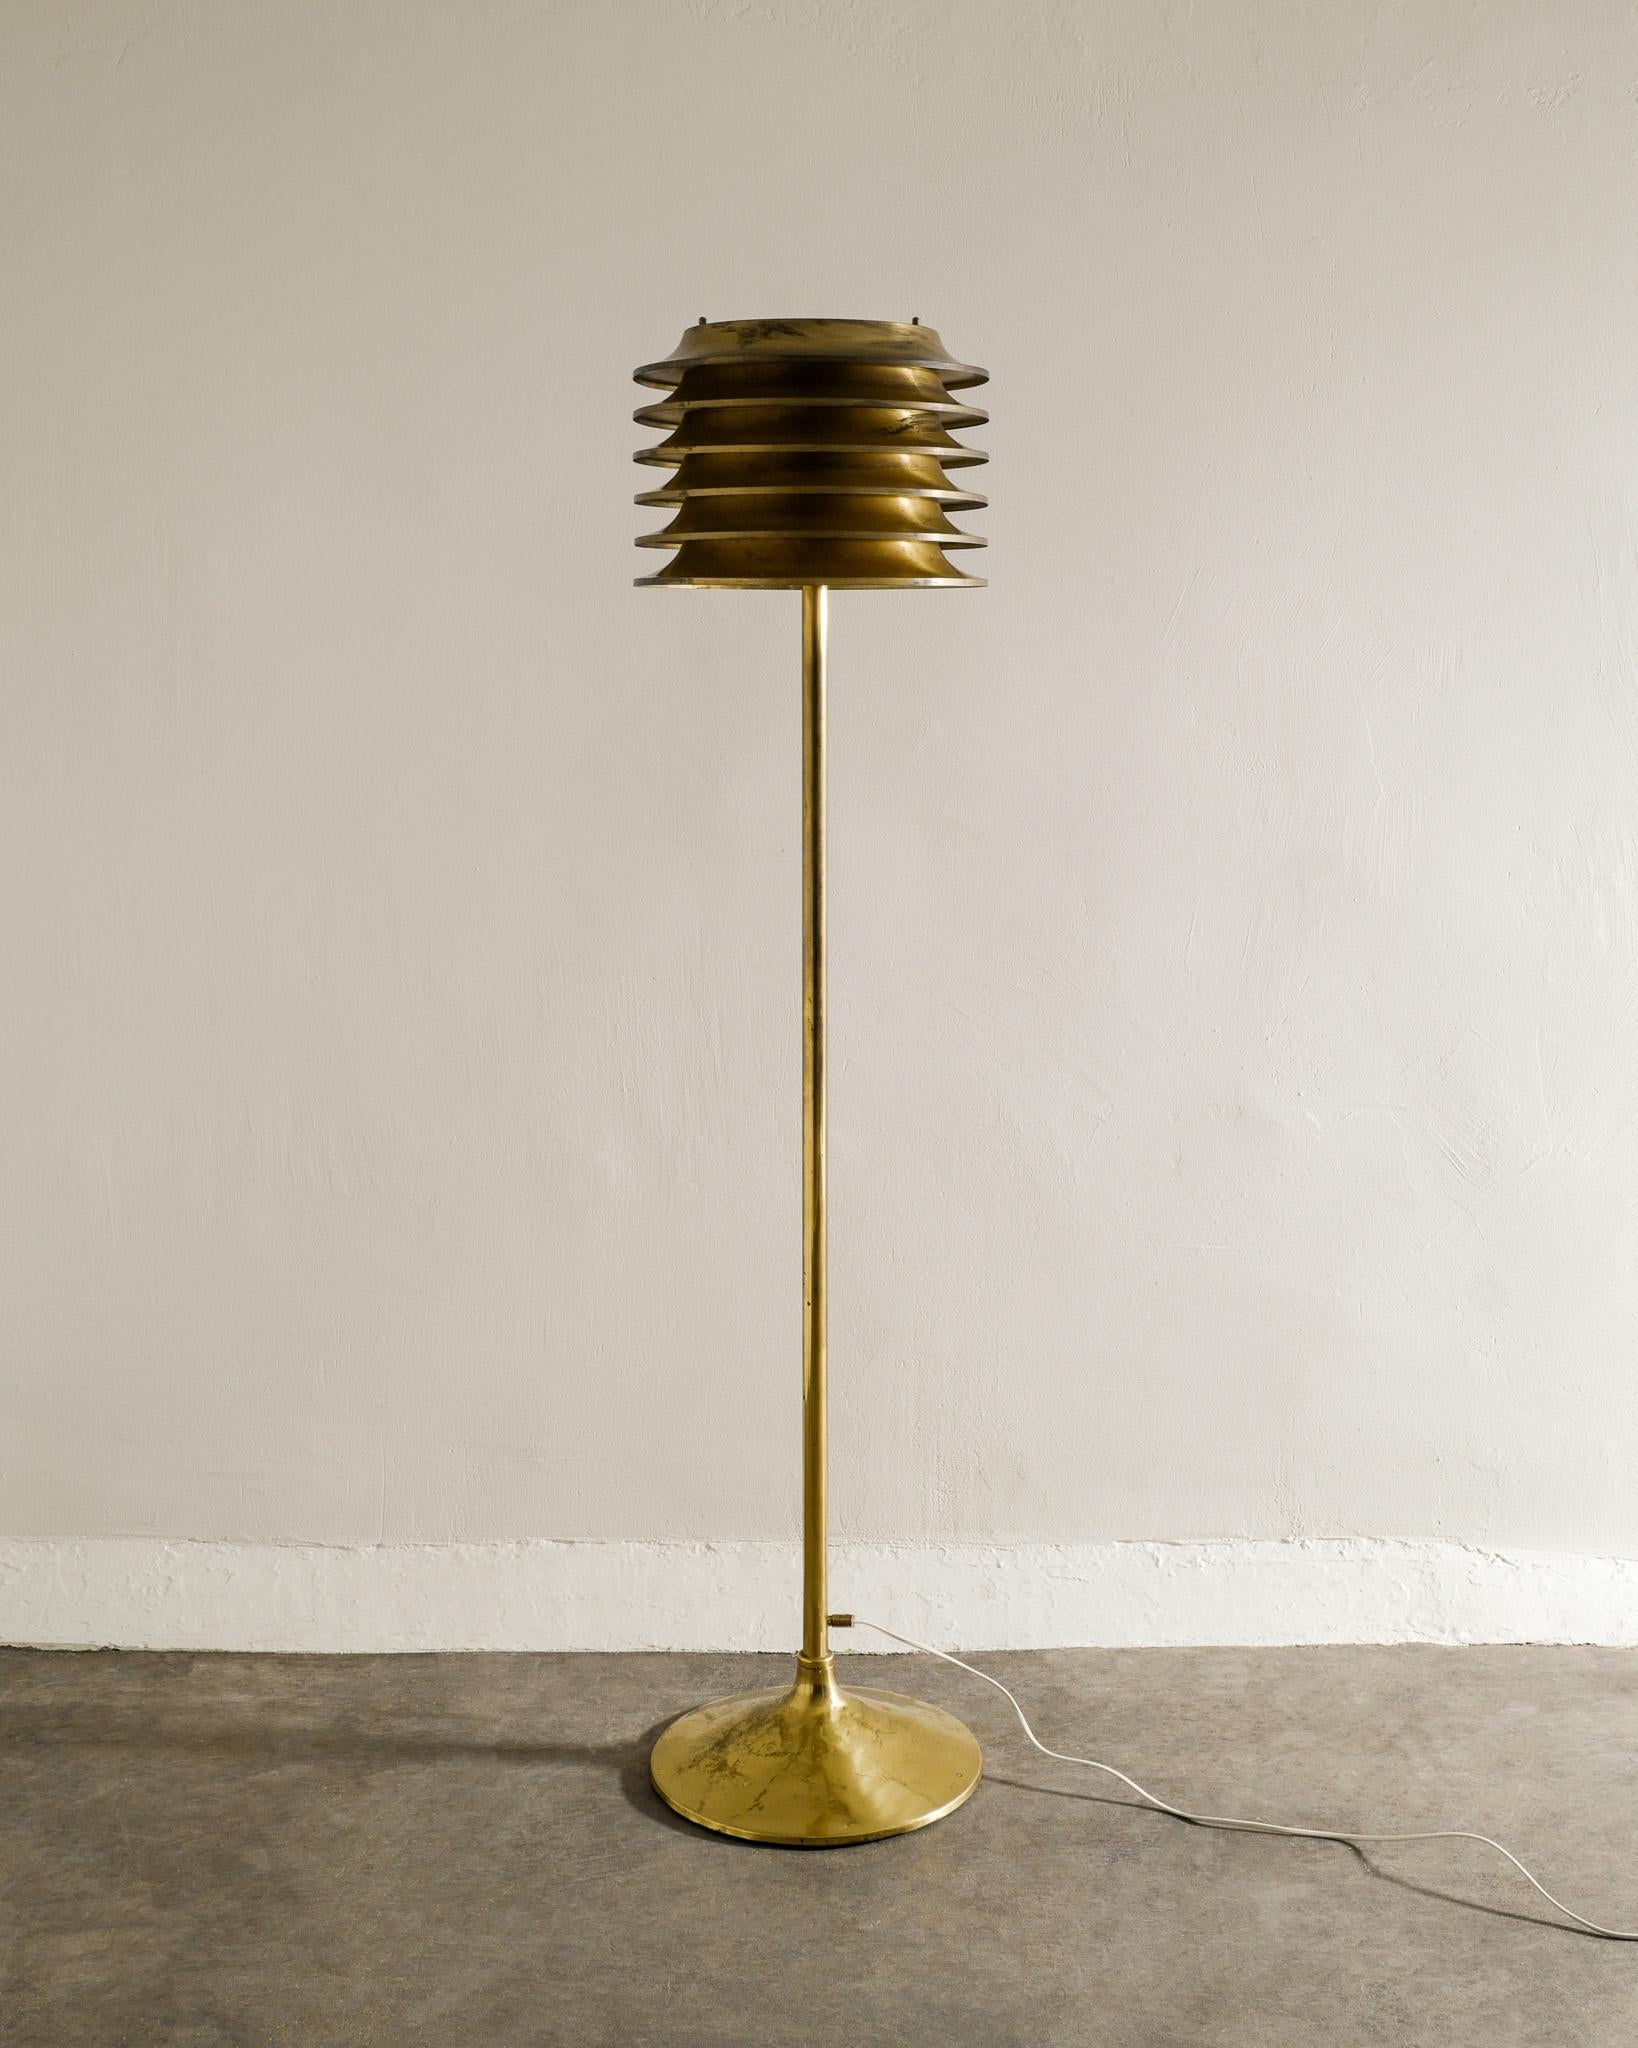 Rare mid century / Scandinavian modern floor lamp in brass by Kai Ruokonen produced by Orno Oy, Finland 1970s. Good original condition with great patina from age and use. Original sticker inside the shade. 

Dimensions: H: 154 cm / 60